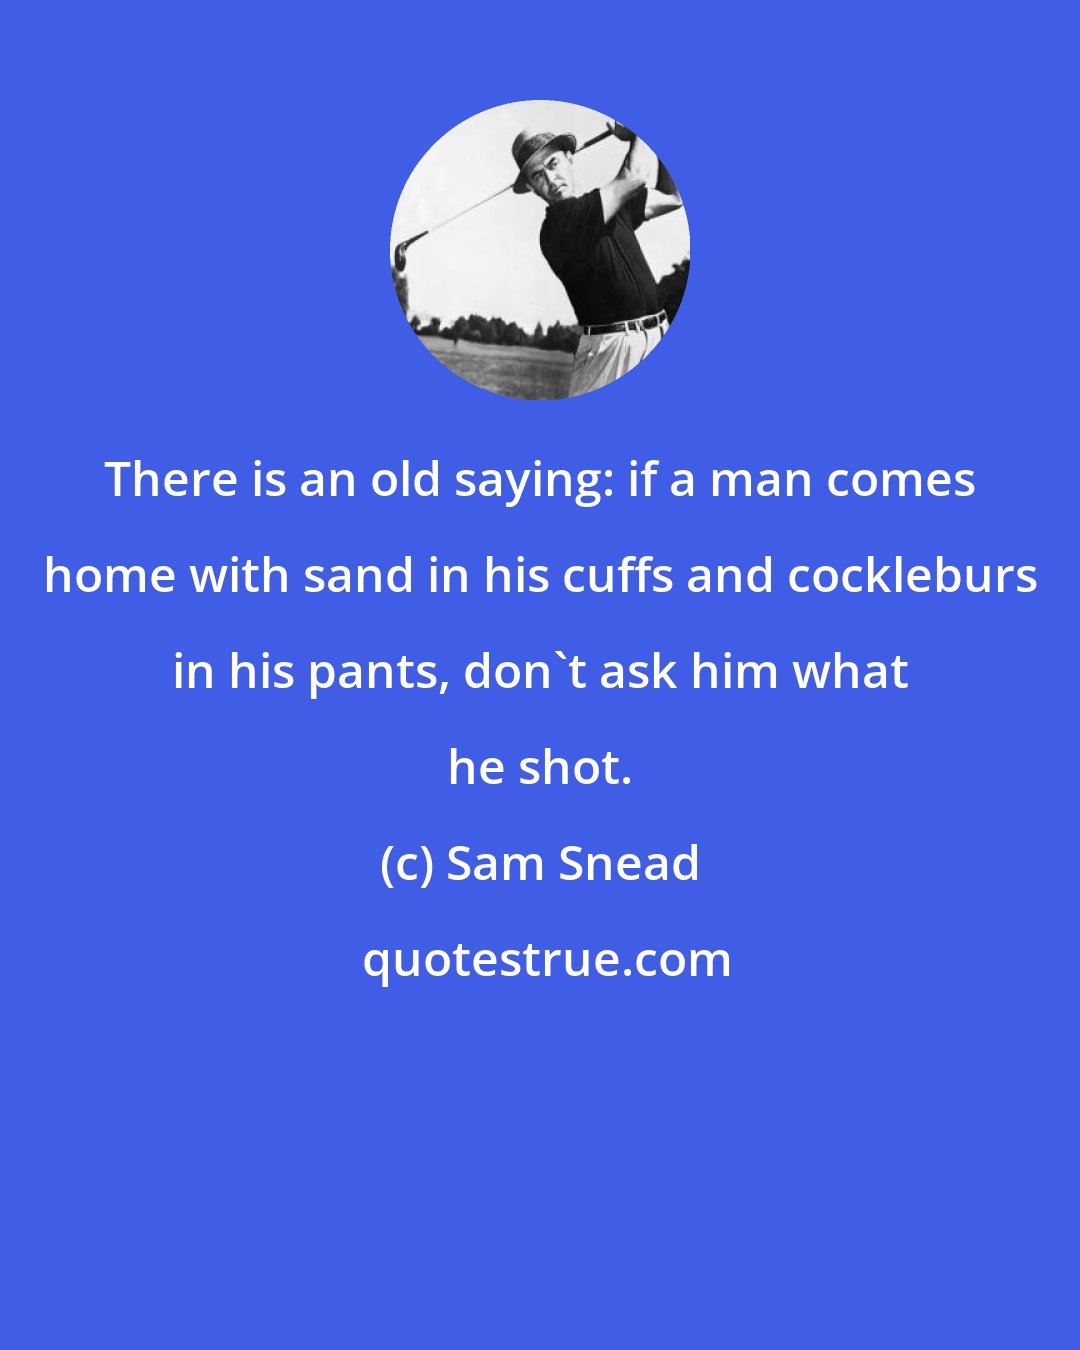 Sam Snead: There is an old saying: if a man comes home with sand in his cuffs and cockleburs in his pants, don't ask him what he shot.